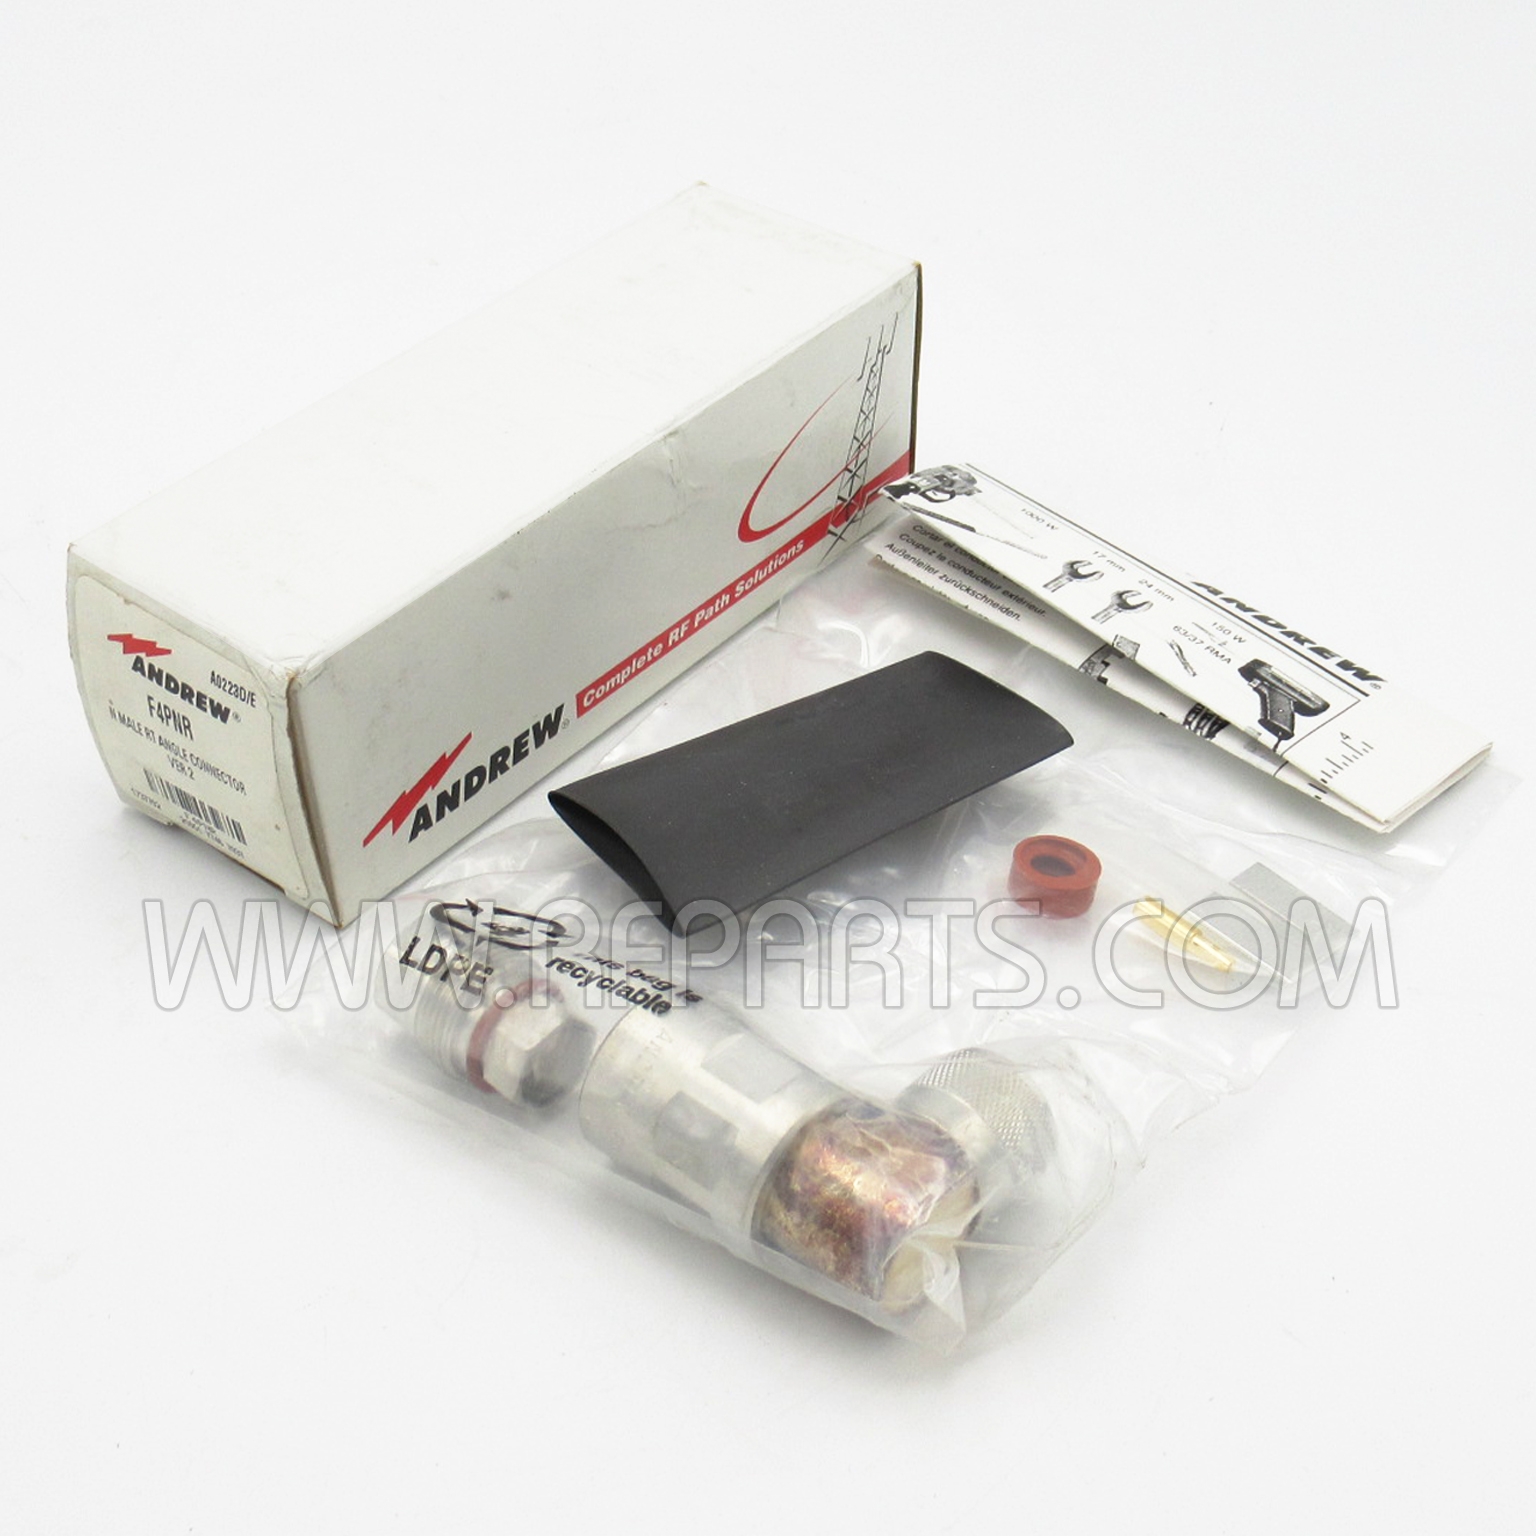 2 Andrew F4PNR N Male Right Angle Connector Ver 